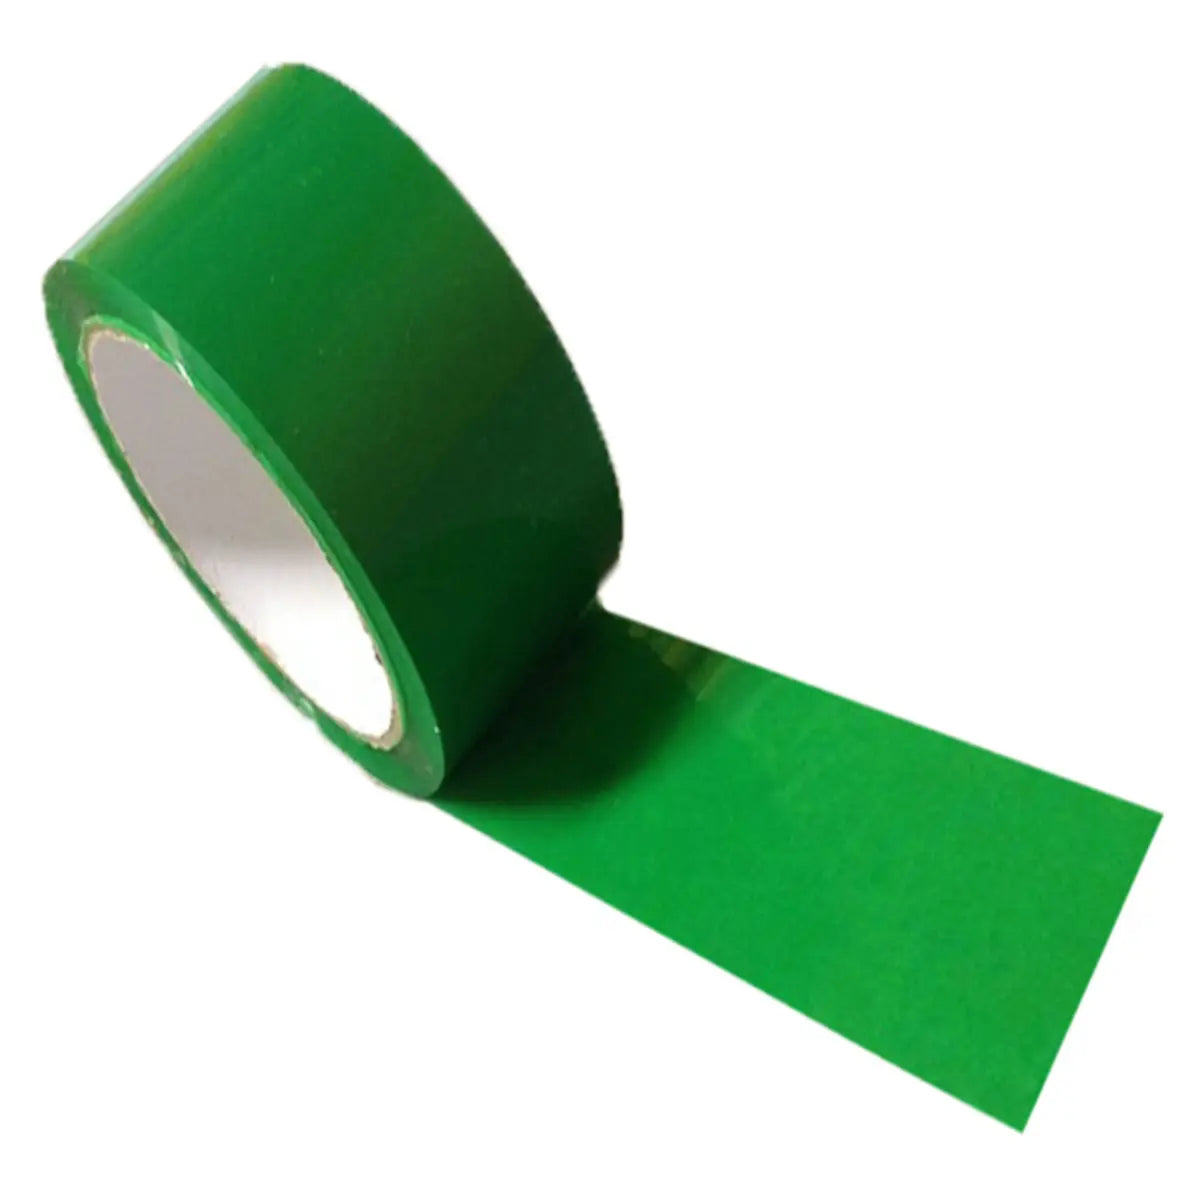 coloured adhesive tape - green